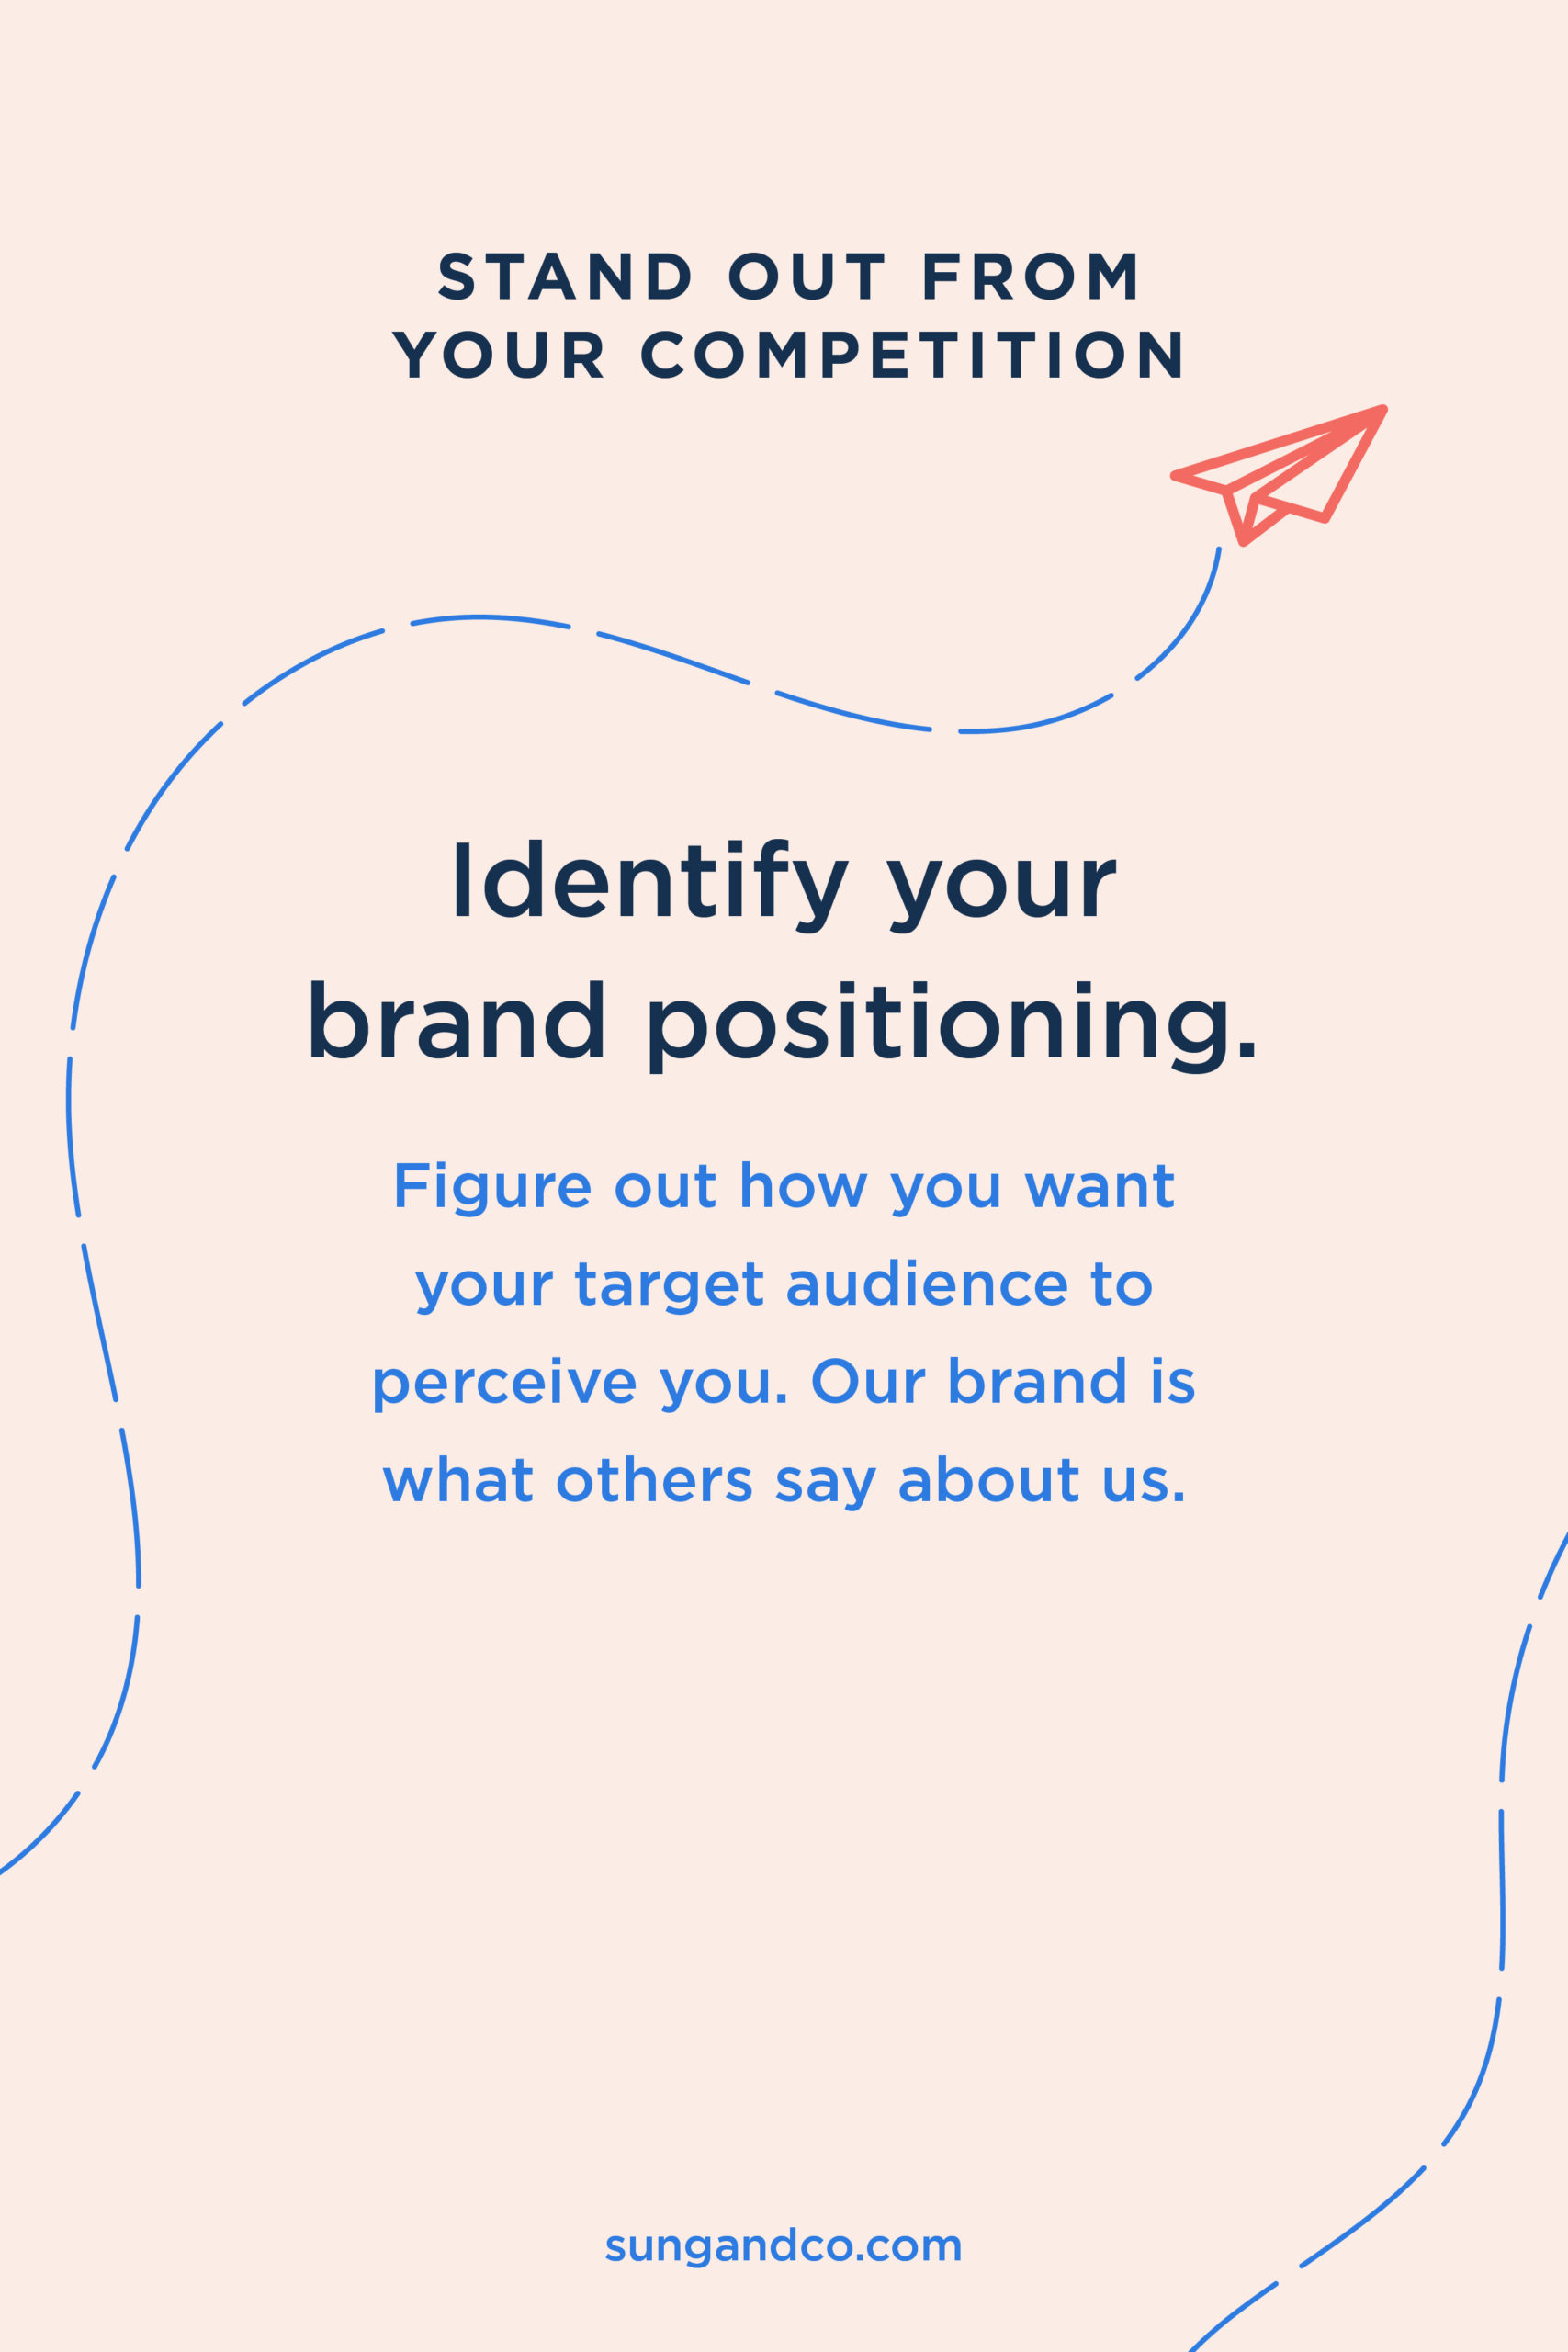 Stand out from your competitors by identify your brand positioning.